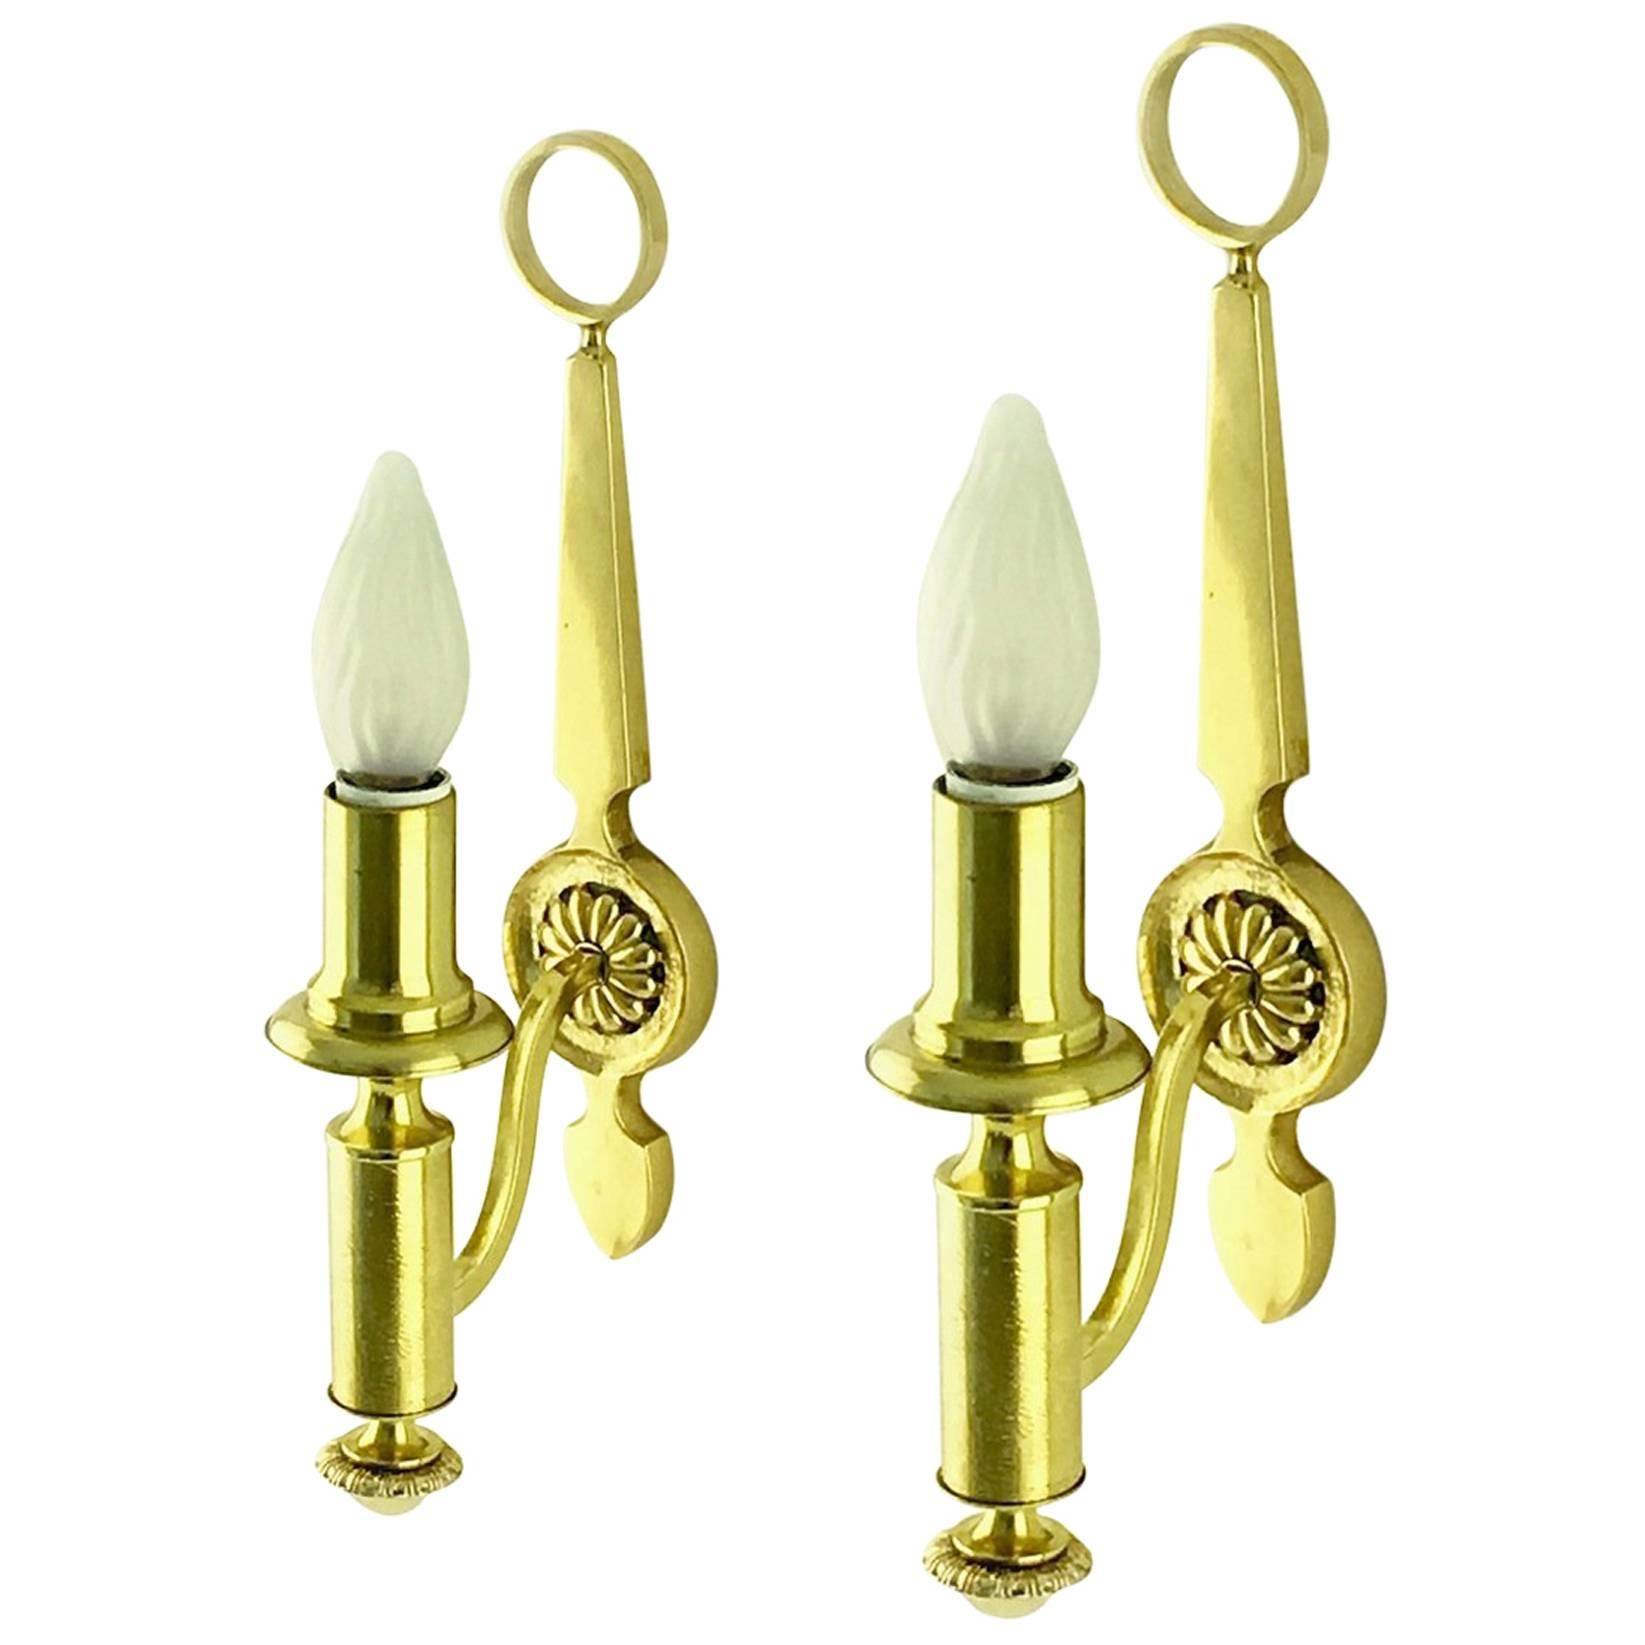 Pair of 1940-1950 Neoclassical Sconces For Sale